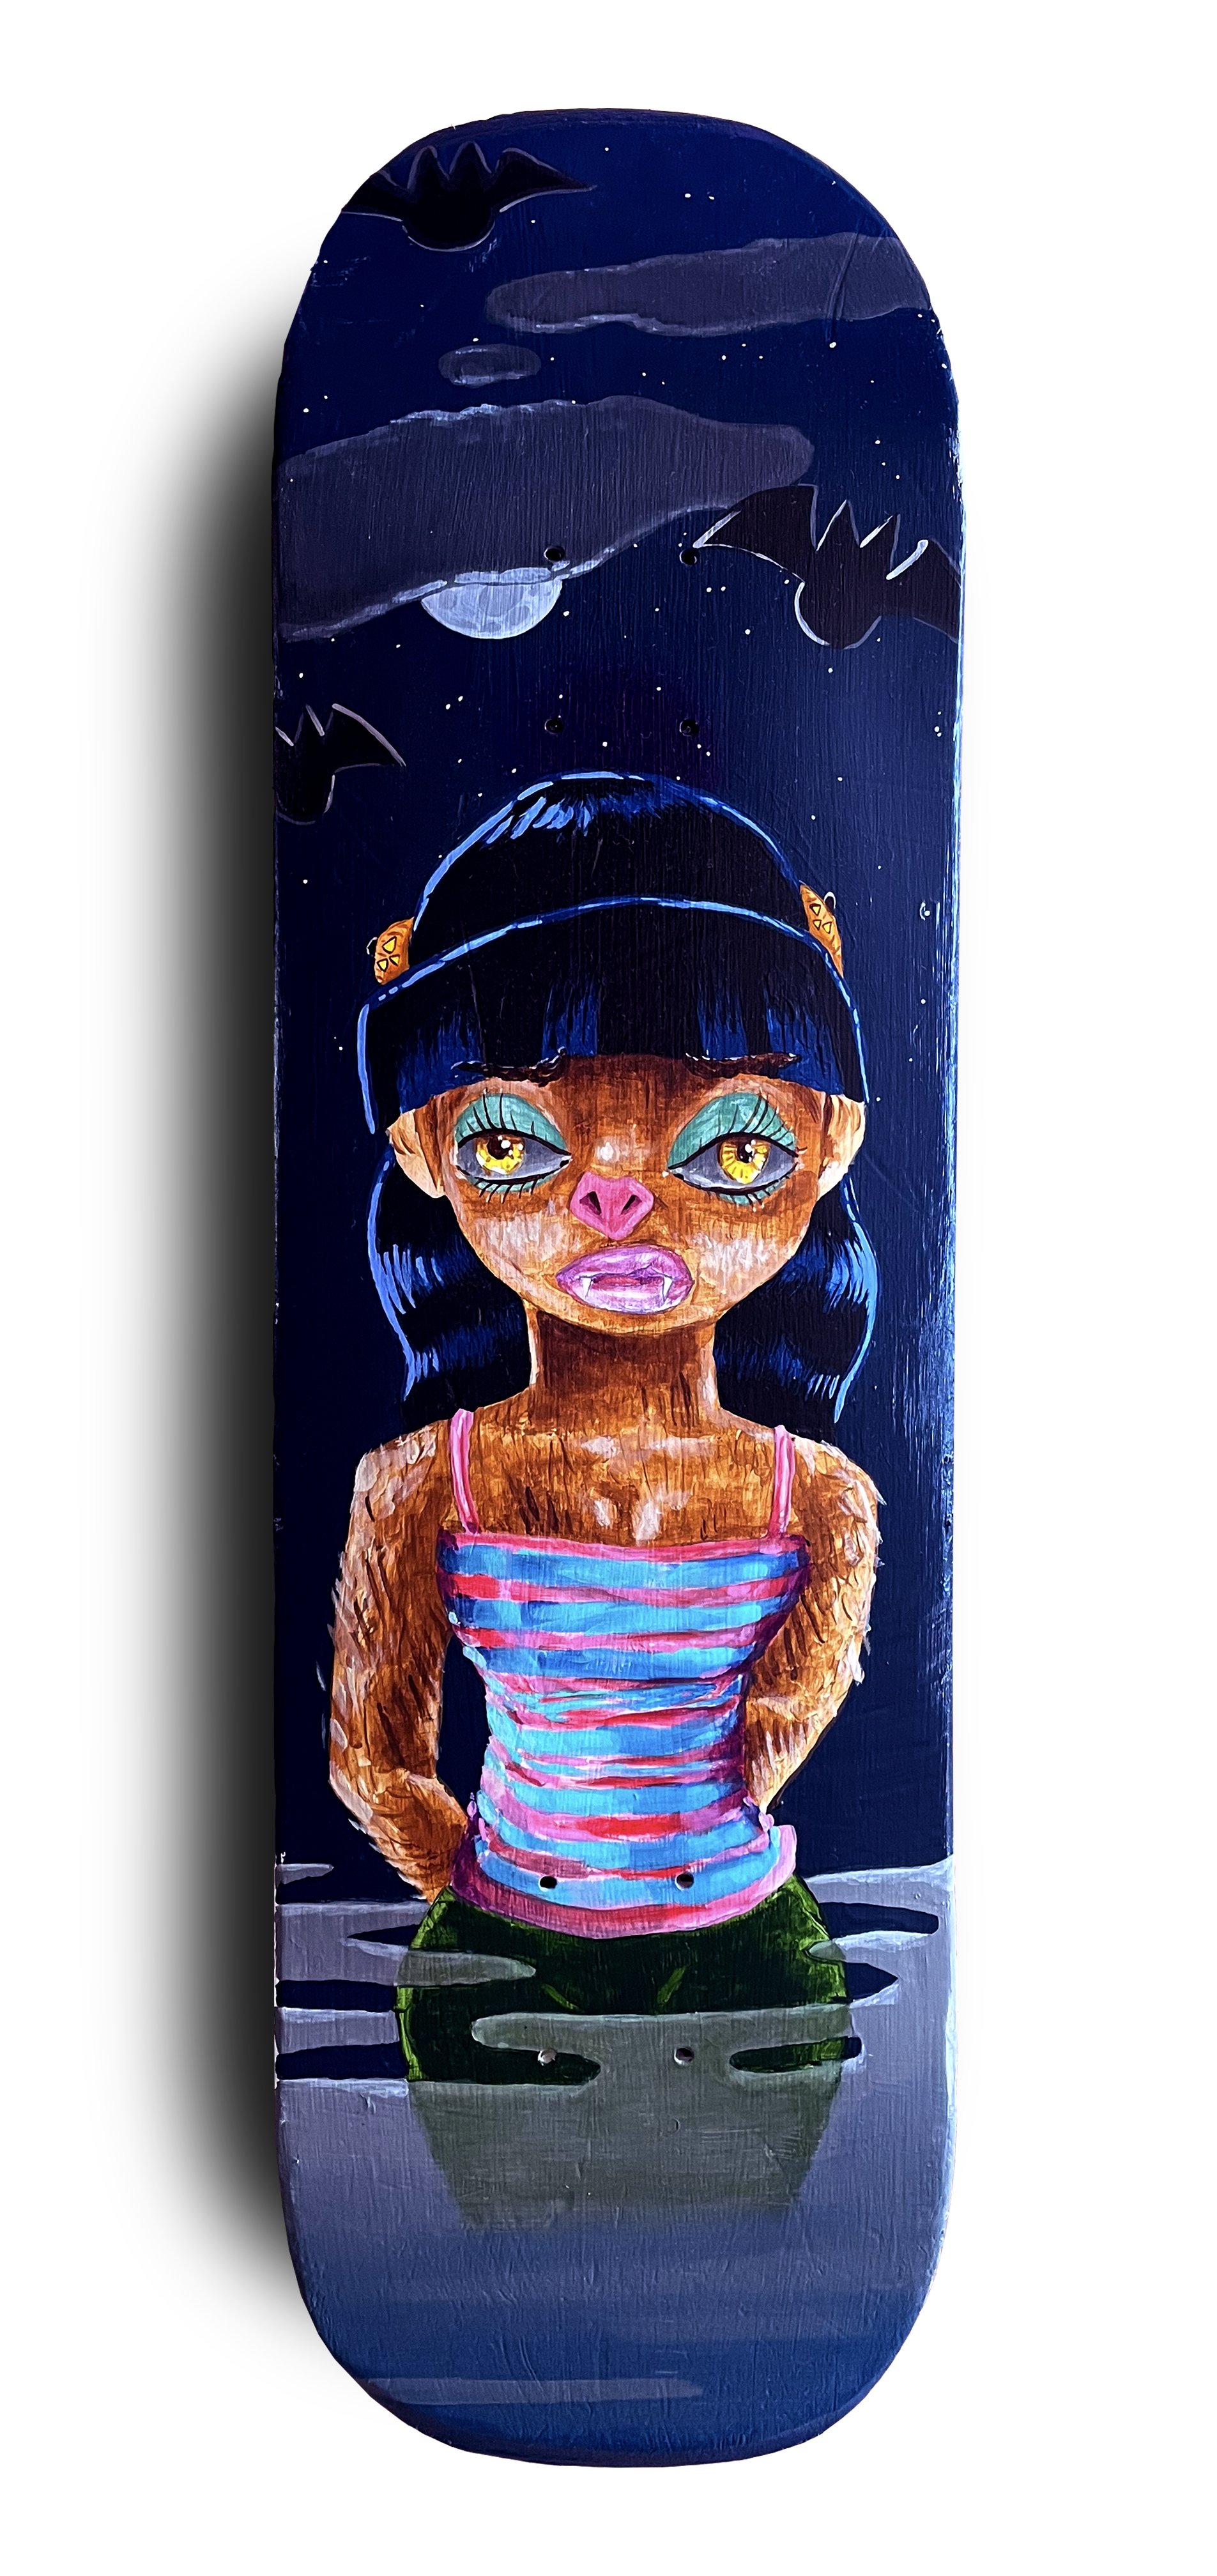   Wolf Girl  acrylic on skateboard. 2021  exhibited -  Crossing Arts Alliance during Costume Party 2021  